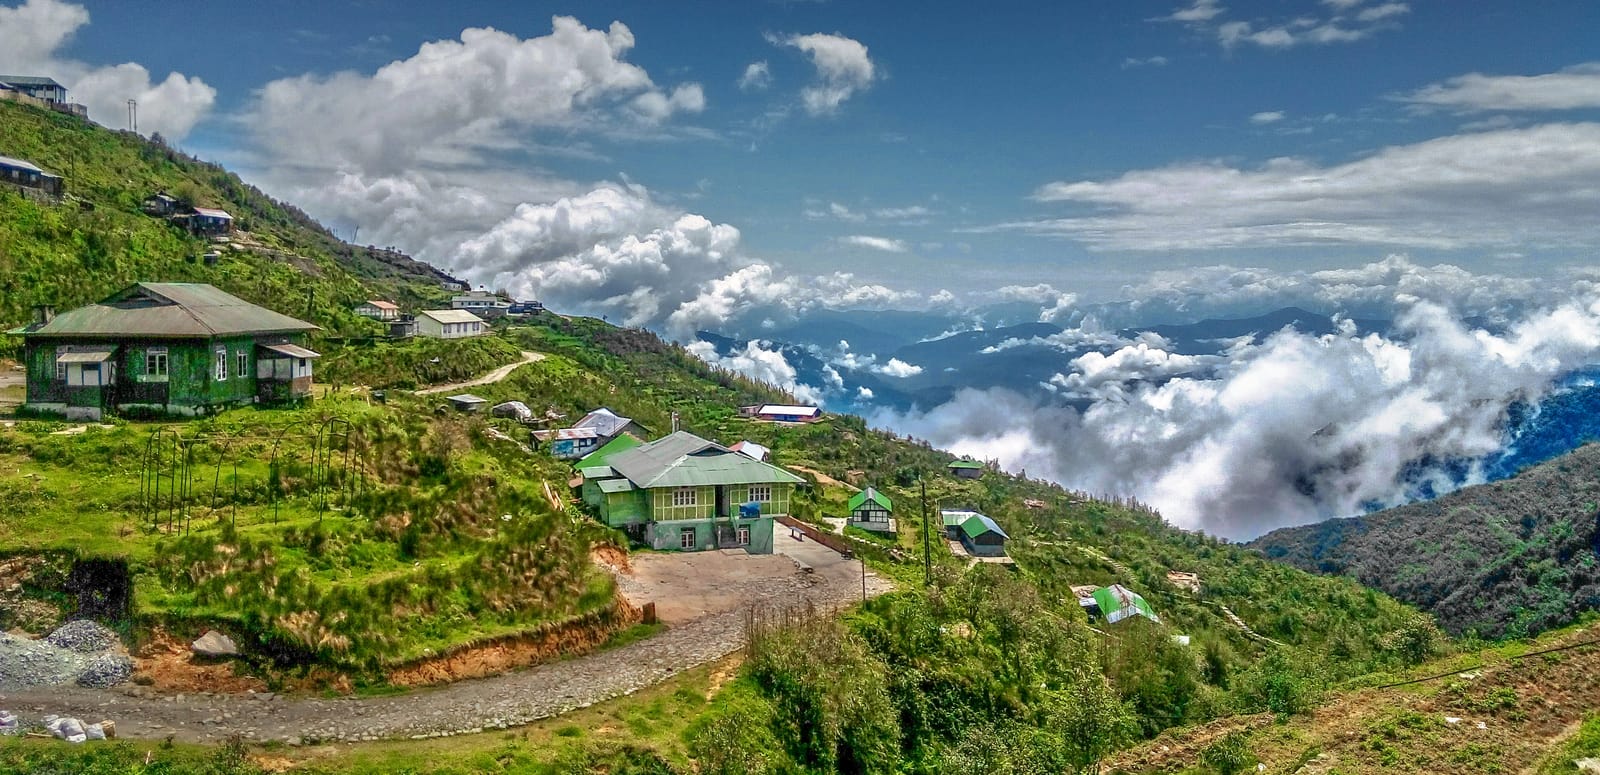 yumthang valley sikkim